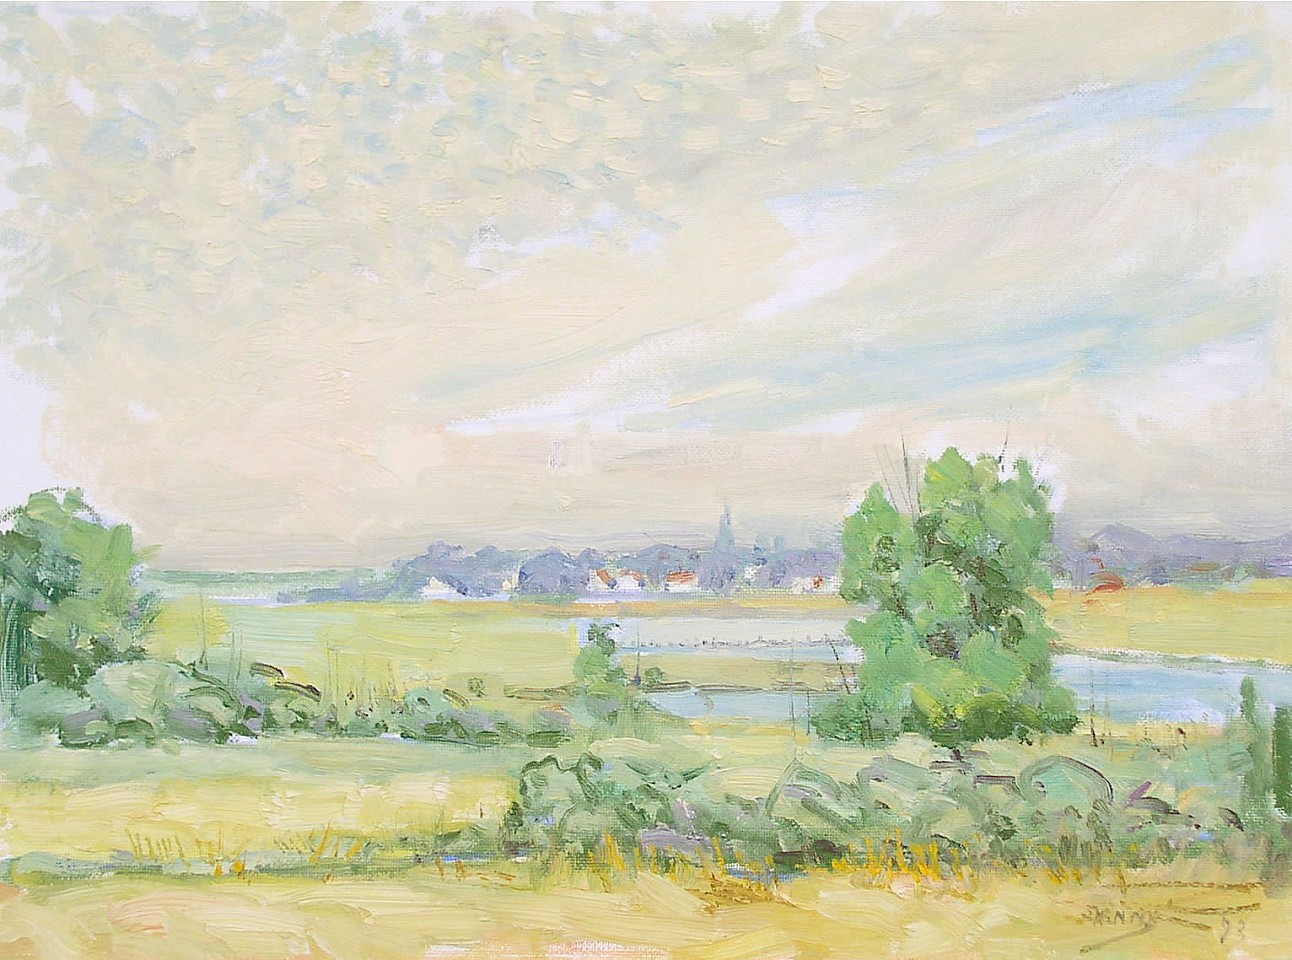 Roger Dennis, Harkness Park, A July Morning, 1993
oil on board, 12" x 16"
signed and dated lower right
RD DS #102U
$2,500